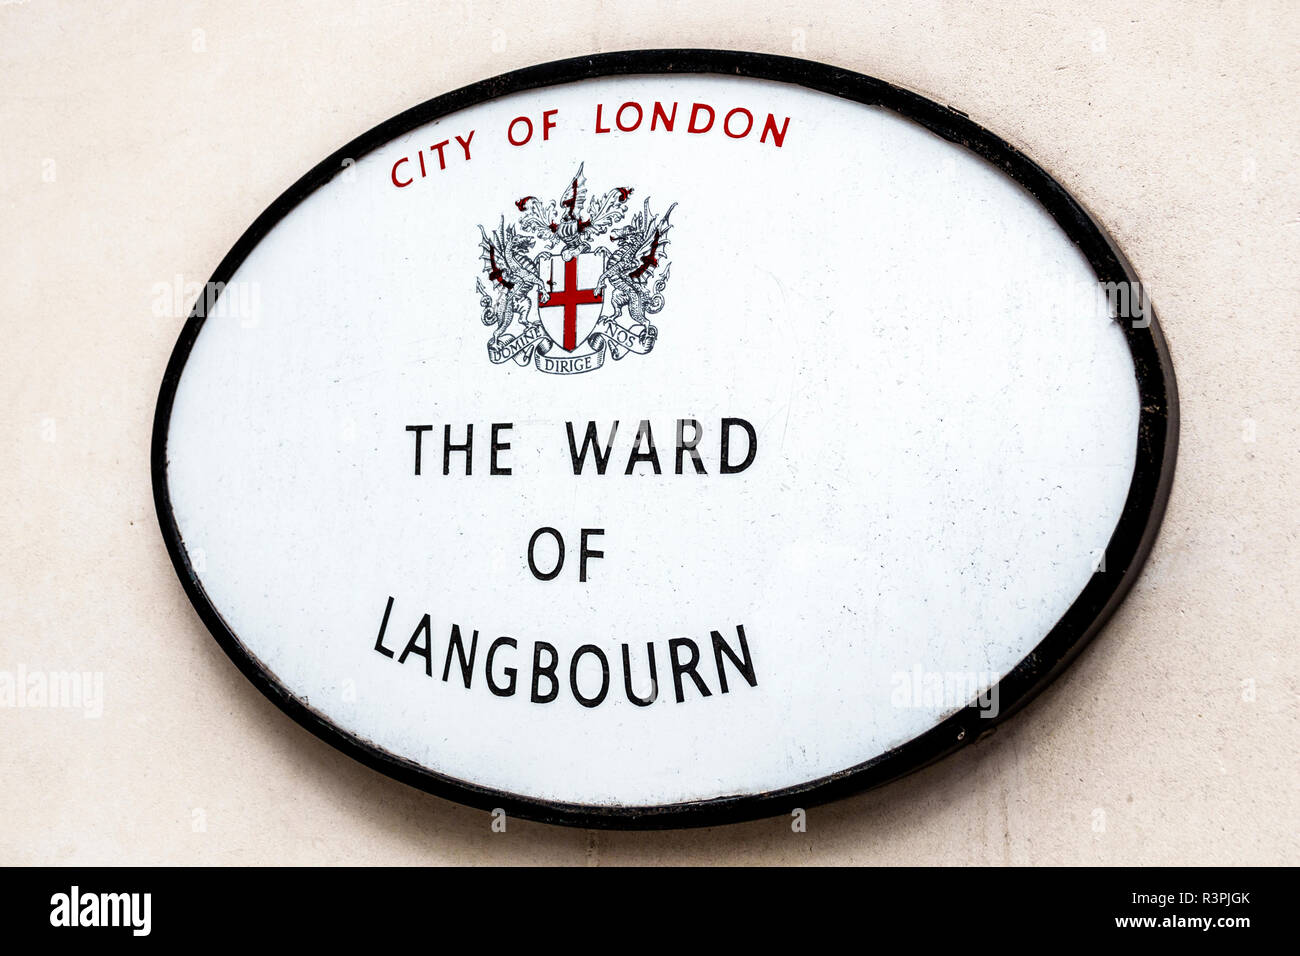 City of London England,UK financial centre center,Ward of Langbourn,ancient ward,electoral district,marker,plaque,UK GB English Europe,UK180827054 Stock Photo